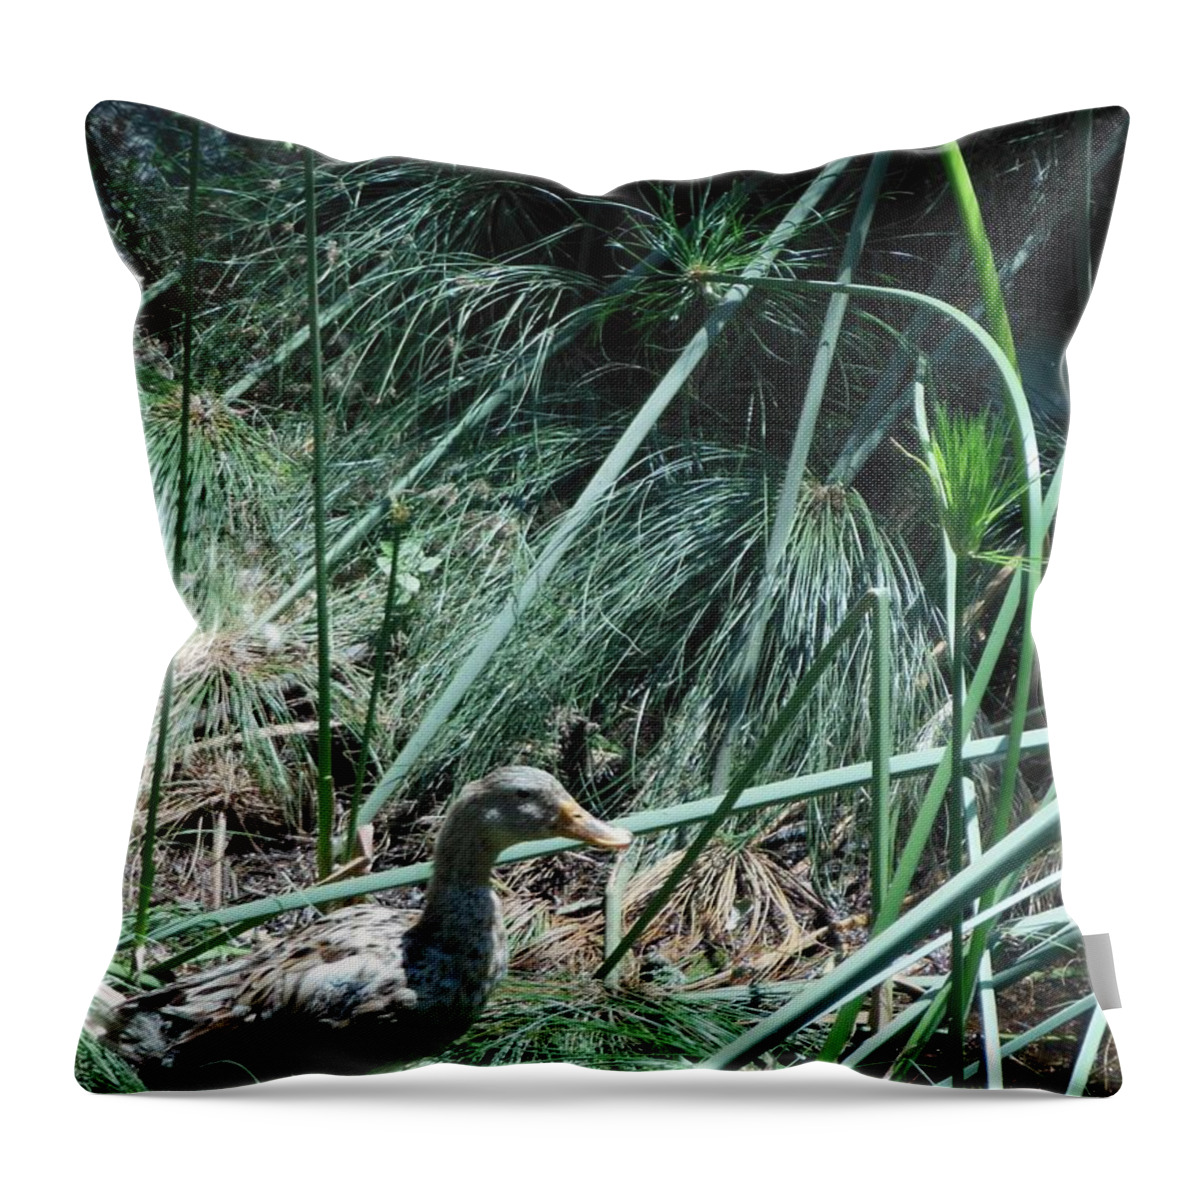 A Speckled Duck Throw Pillow featuring the photograph A Speckled Duck by Esther Newman-Cohen